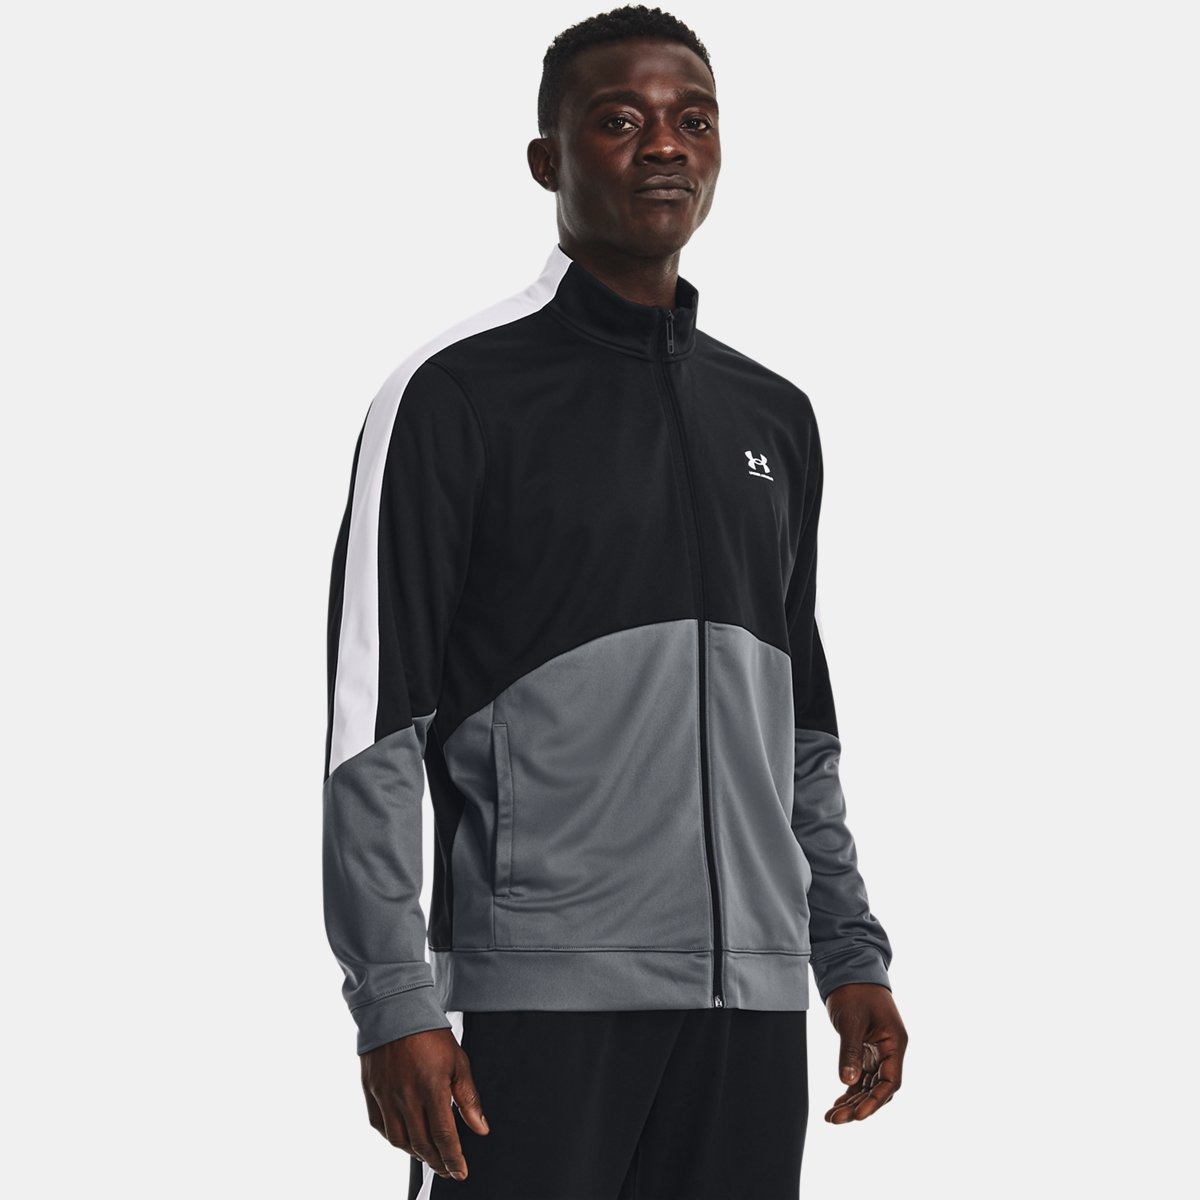 Jacket in Black for Man at Under Armour GOOFASH